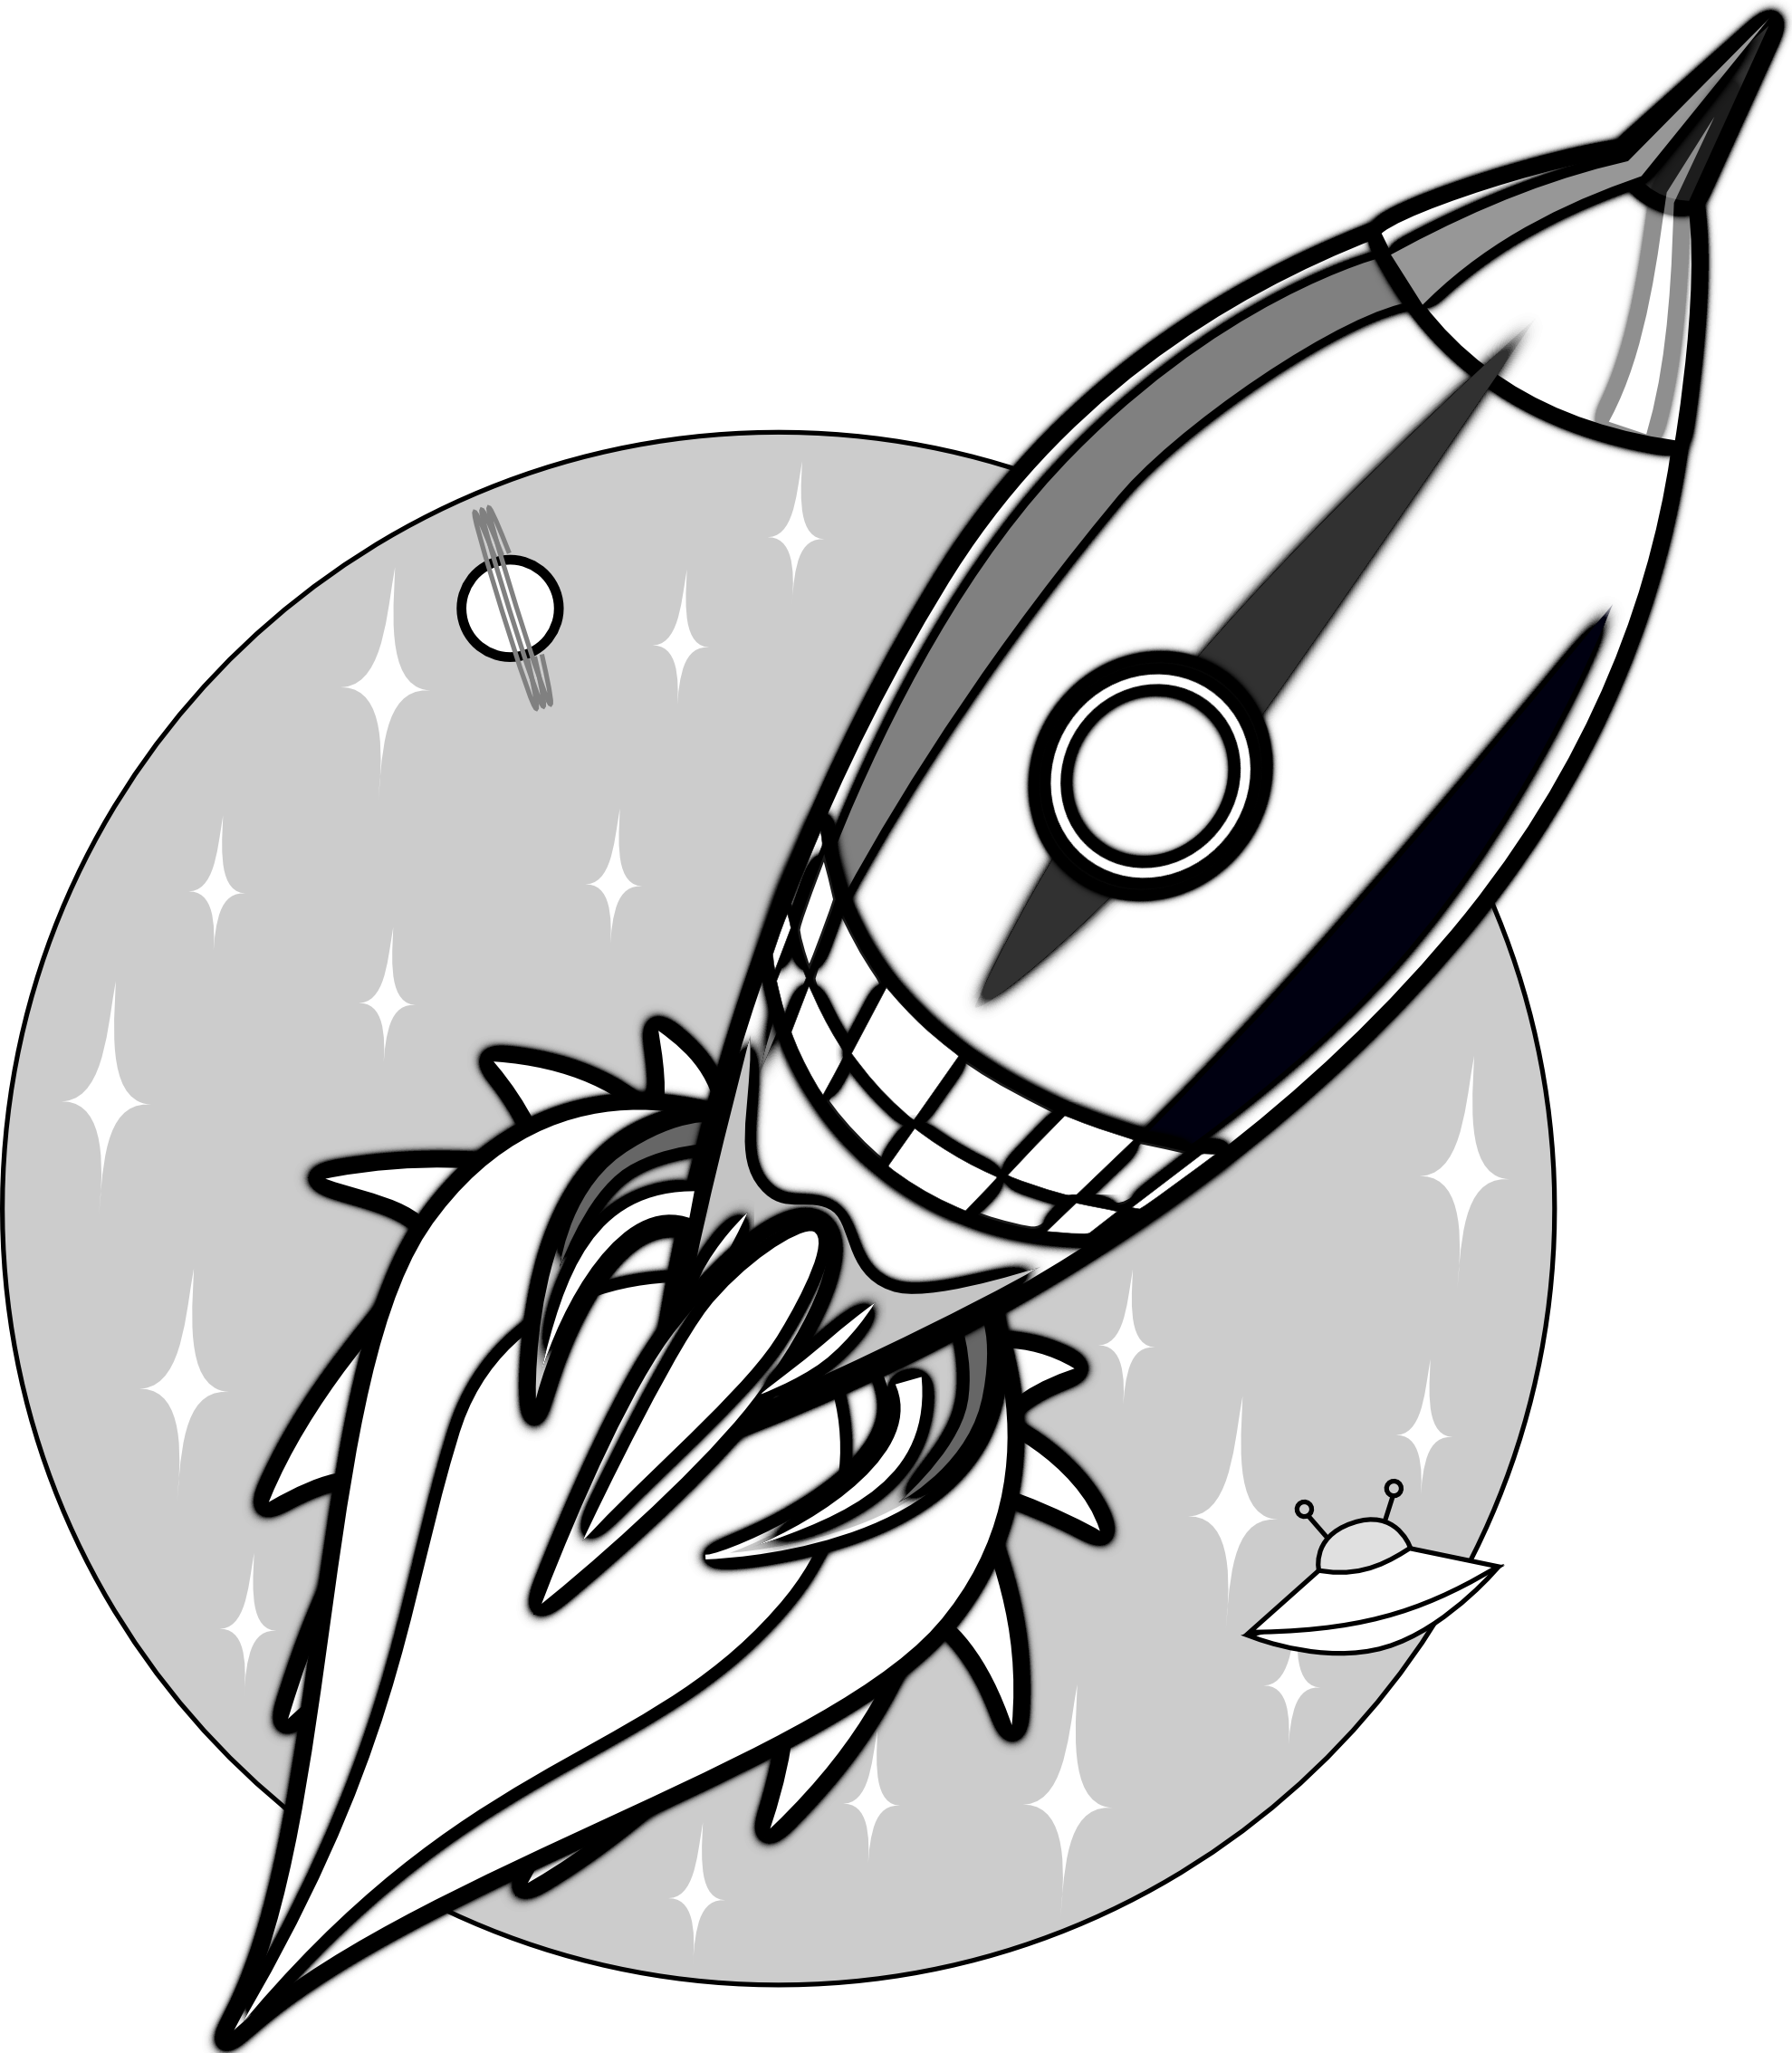 Space Clip Art Black And White - ClipArt Best